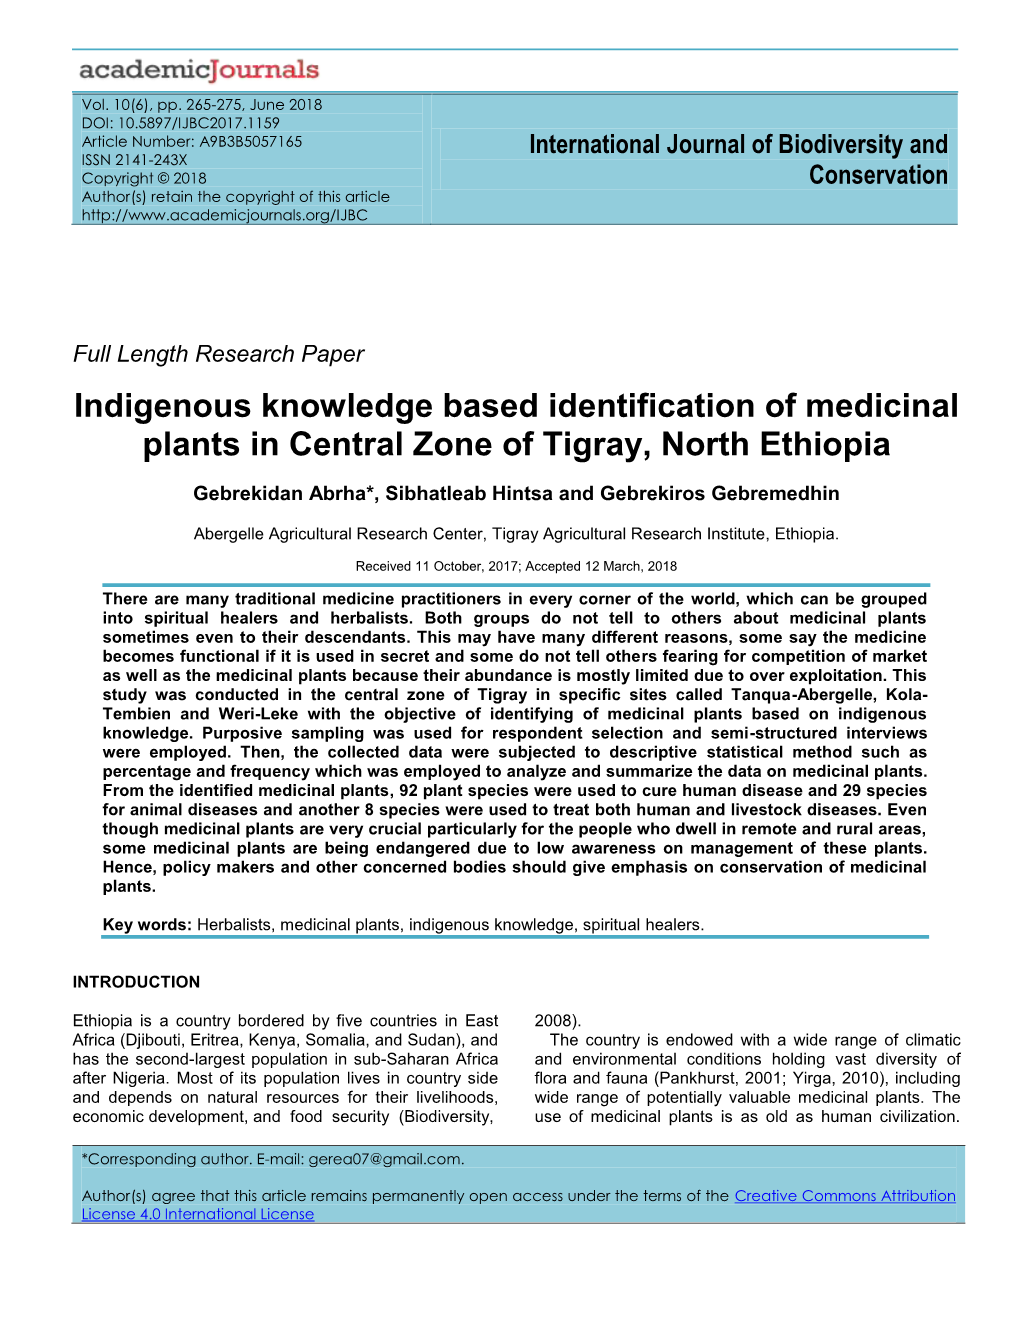 Indigenous Knowledge Based Identification of Medicinal Plants in Central Zone of Tigray, North Ethiopia